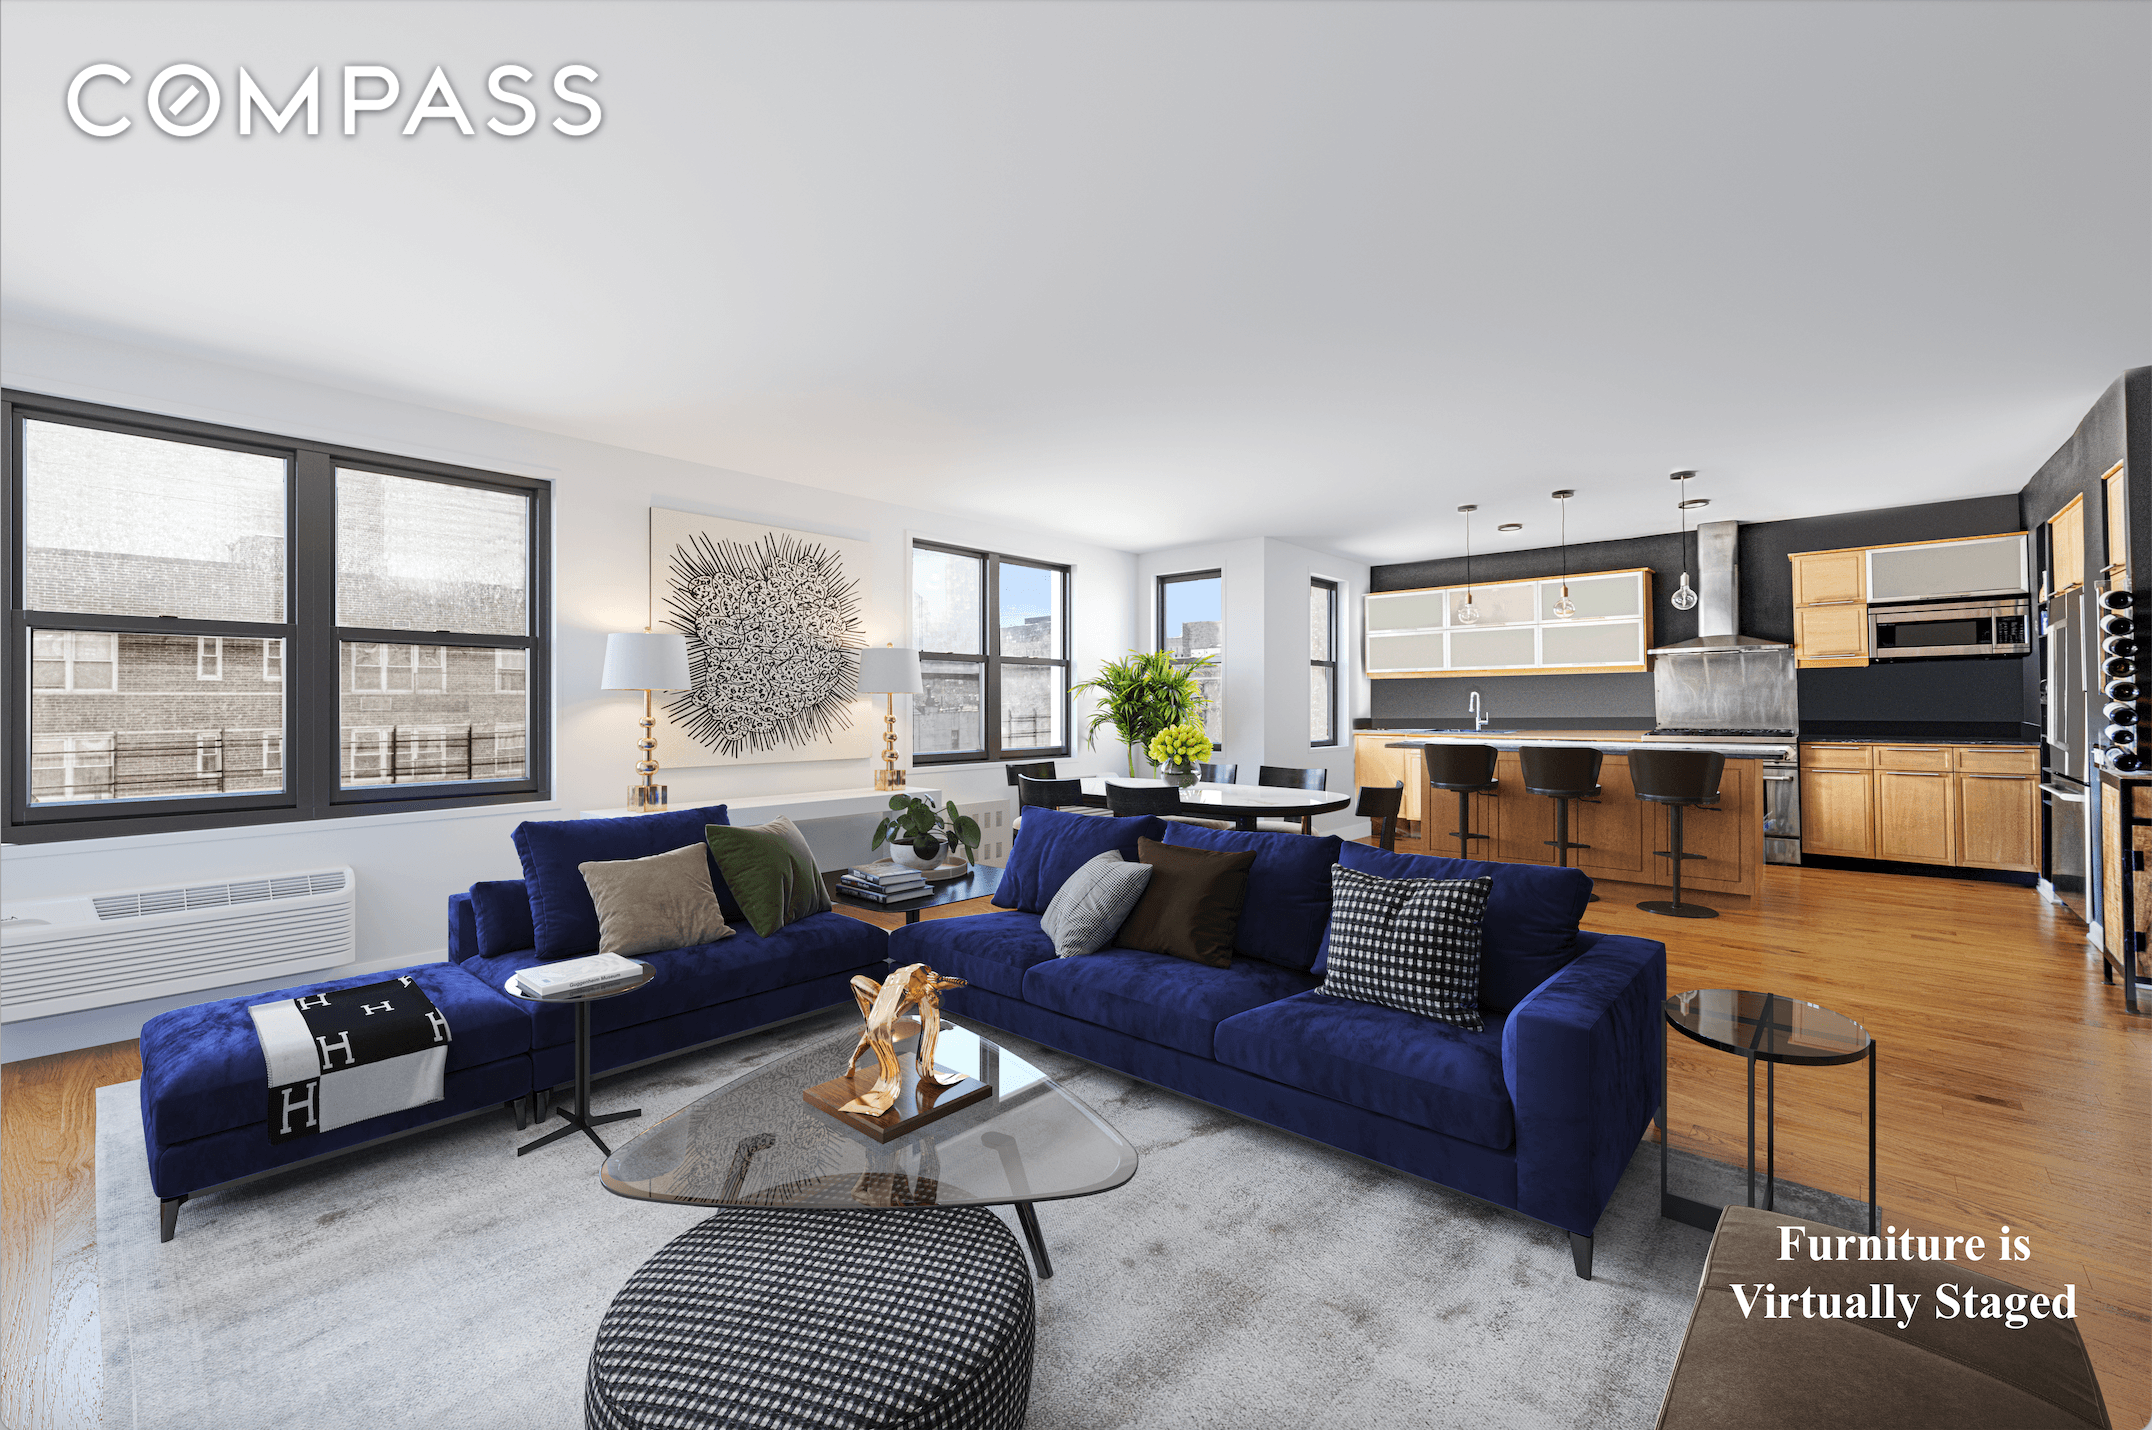 Welcome home to this thoughtfully designed two bedroom apartment situated at the crossroads of the West Village and Greenwich Village.